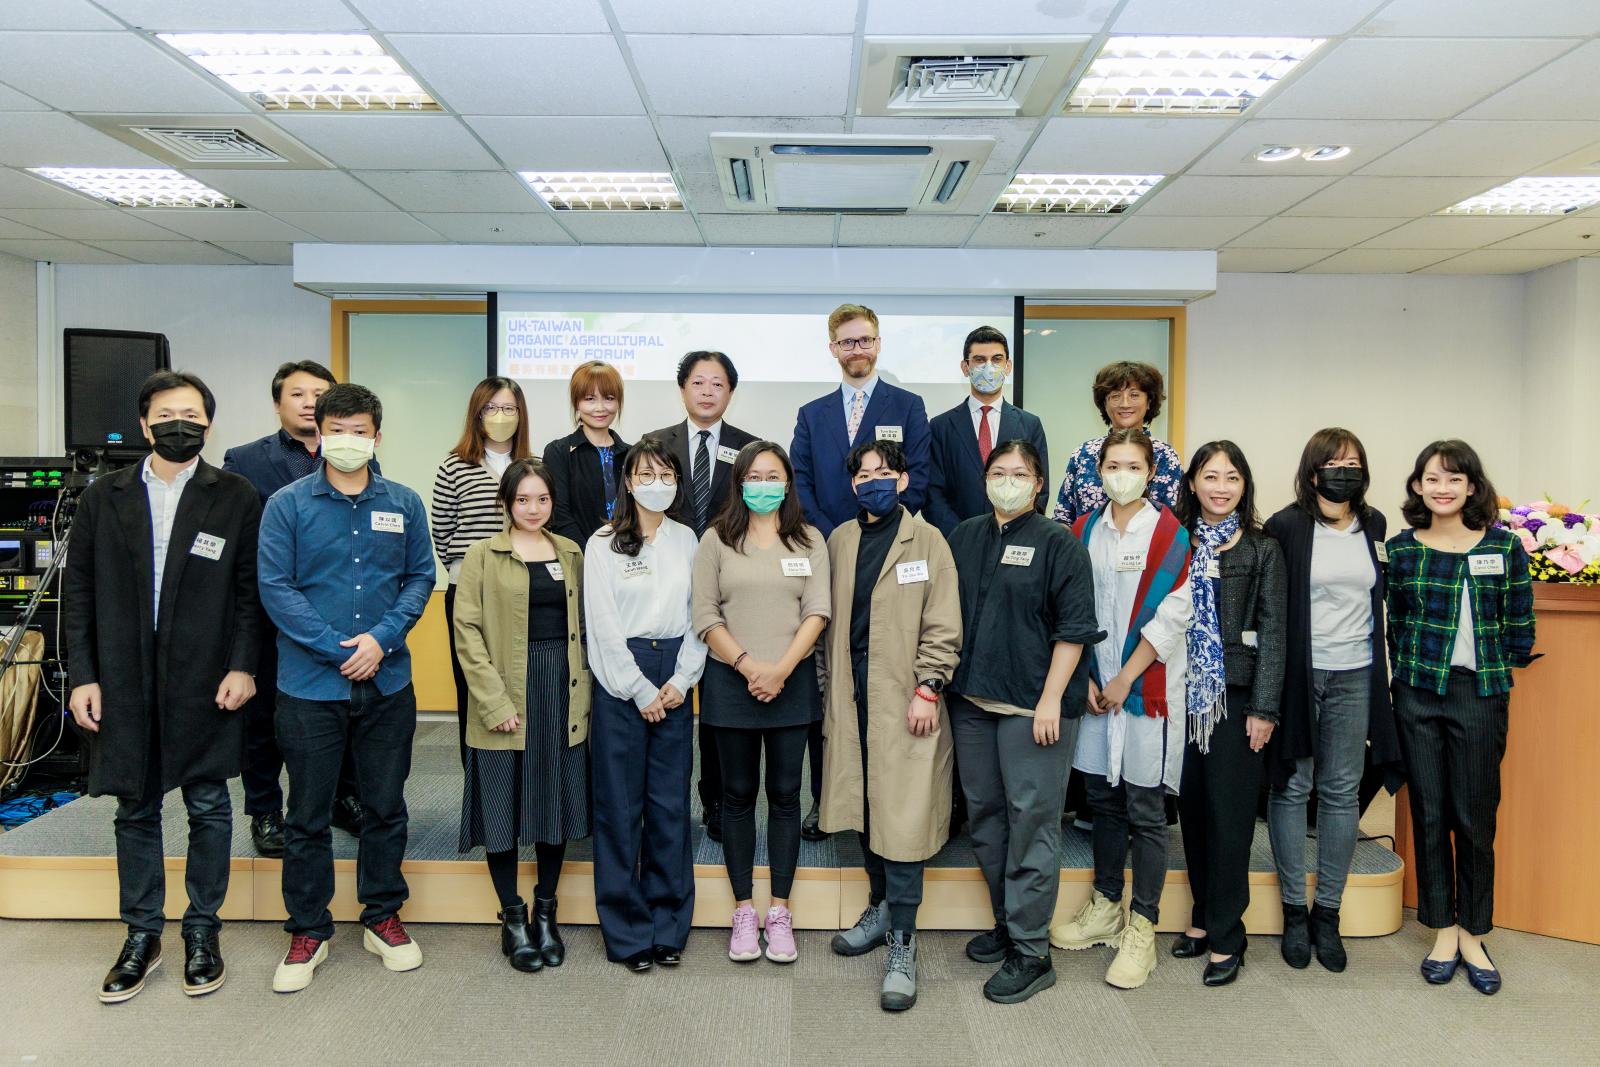 A group photo of staff from the Council of Agriculture and the British Office Taipei.